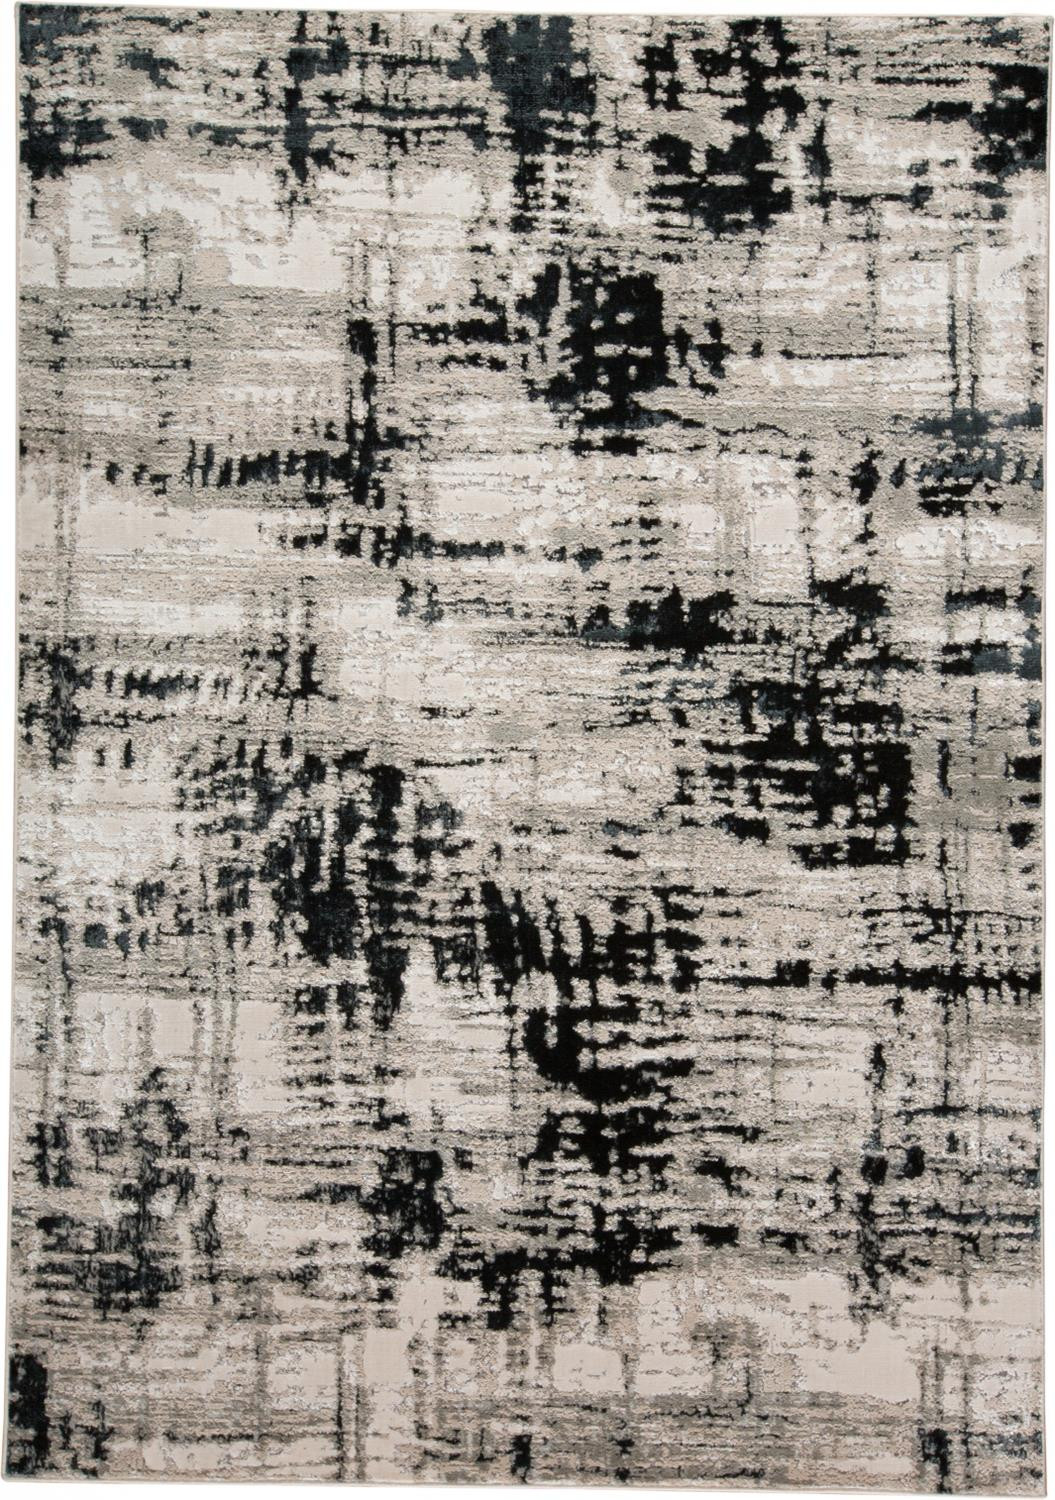 5' X 8' Black White And Gray Stain Resistant Area Rug-515293-1